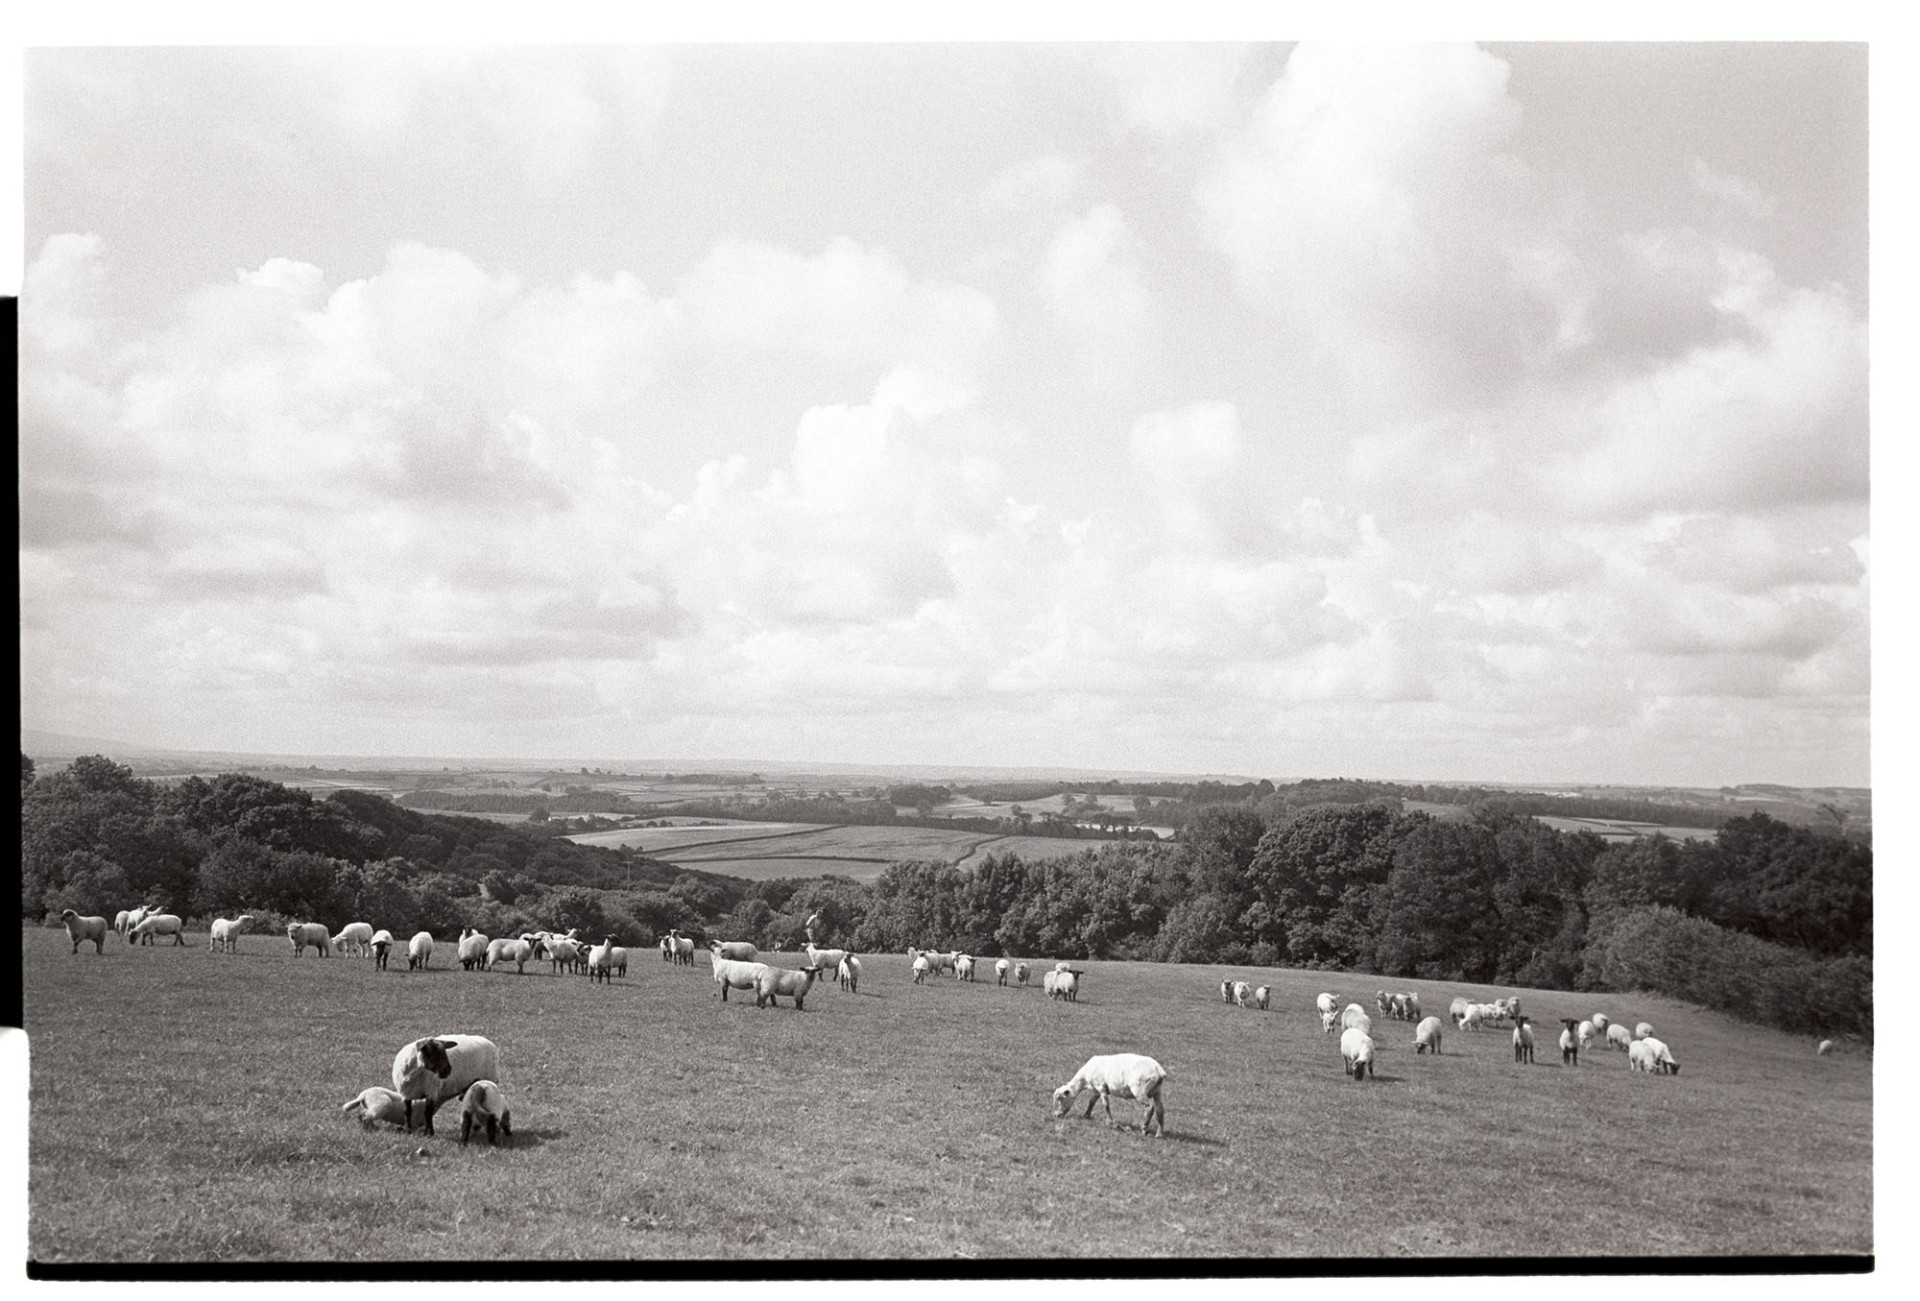 Landscape with ewe suckling lambs, sun and clouds. 
[A flock of sheep grazing in a sunny field at Ashwell, Dolton. A ewe with two suckling lambs are in the foreground and a view of fields, trees and hedgerows is visible in the background.]